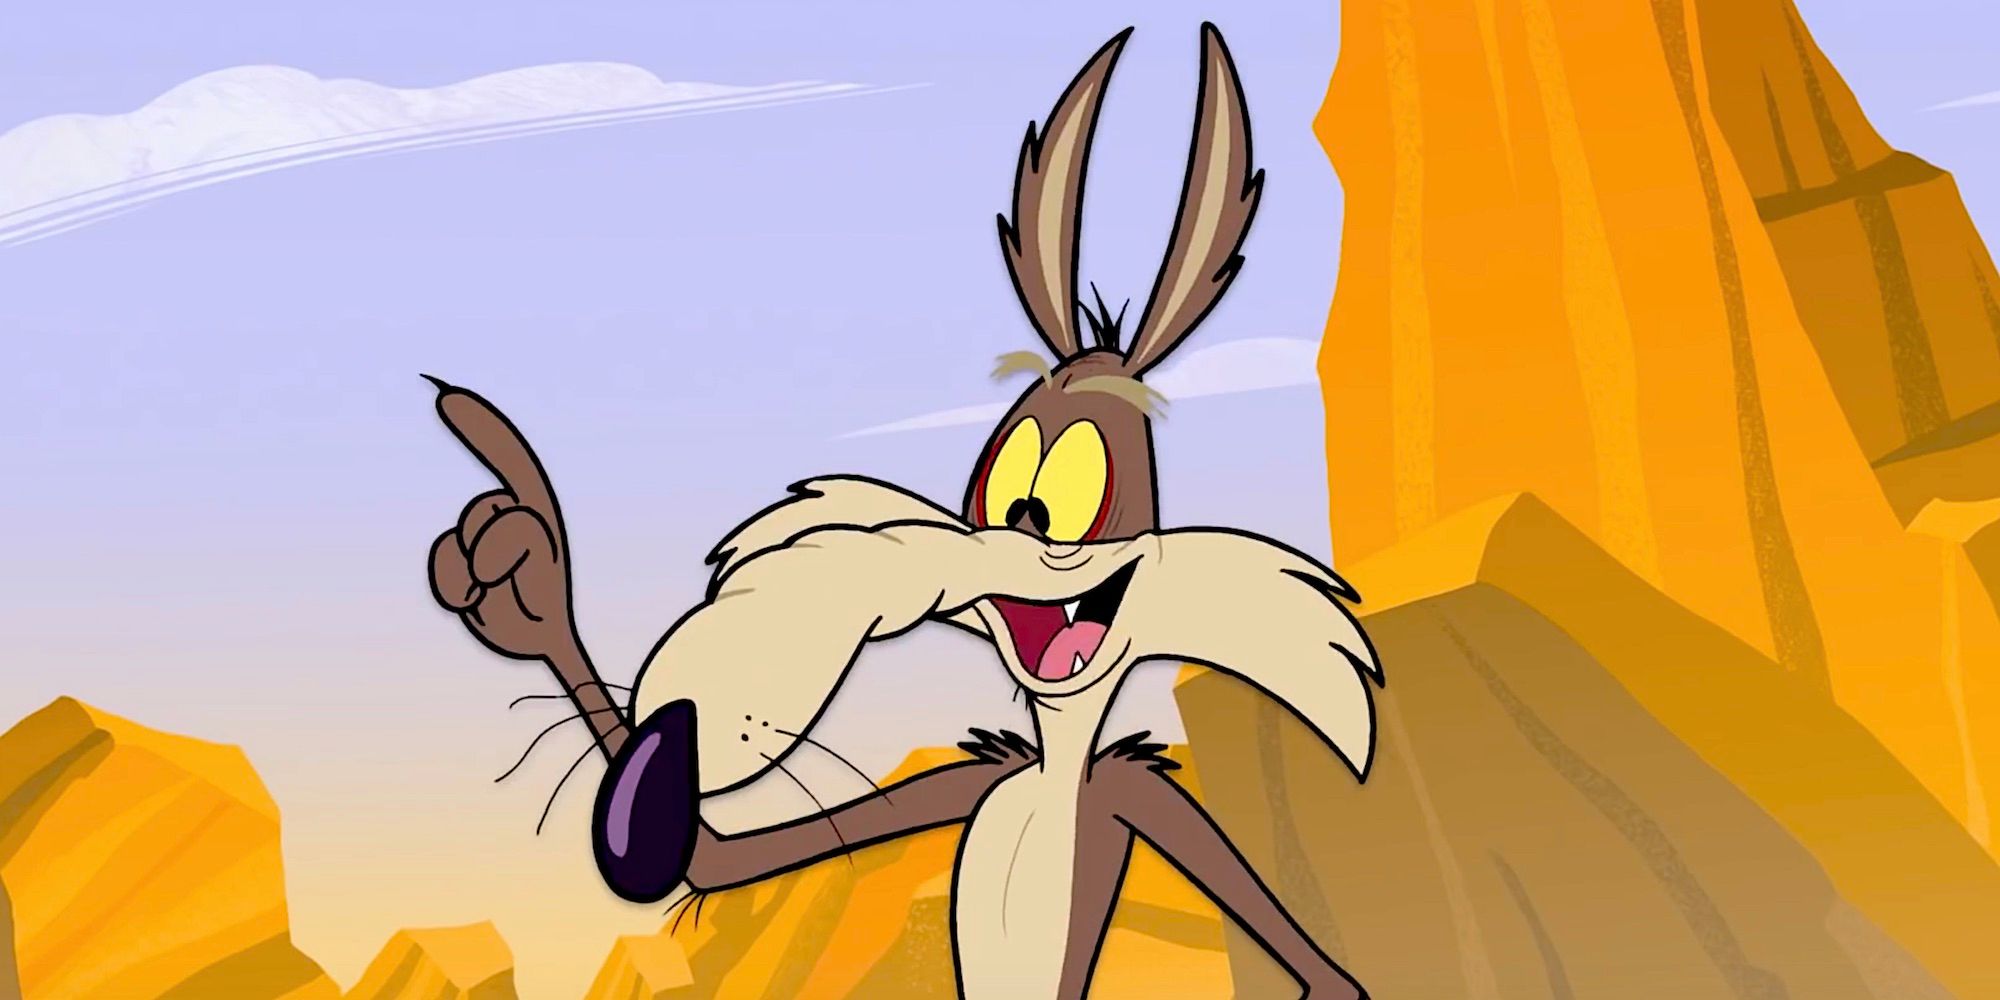 Wile E. Coyote has an idea in Looney Tunes 